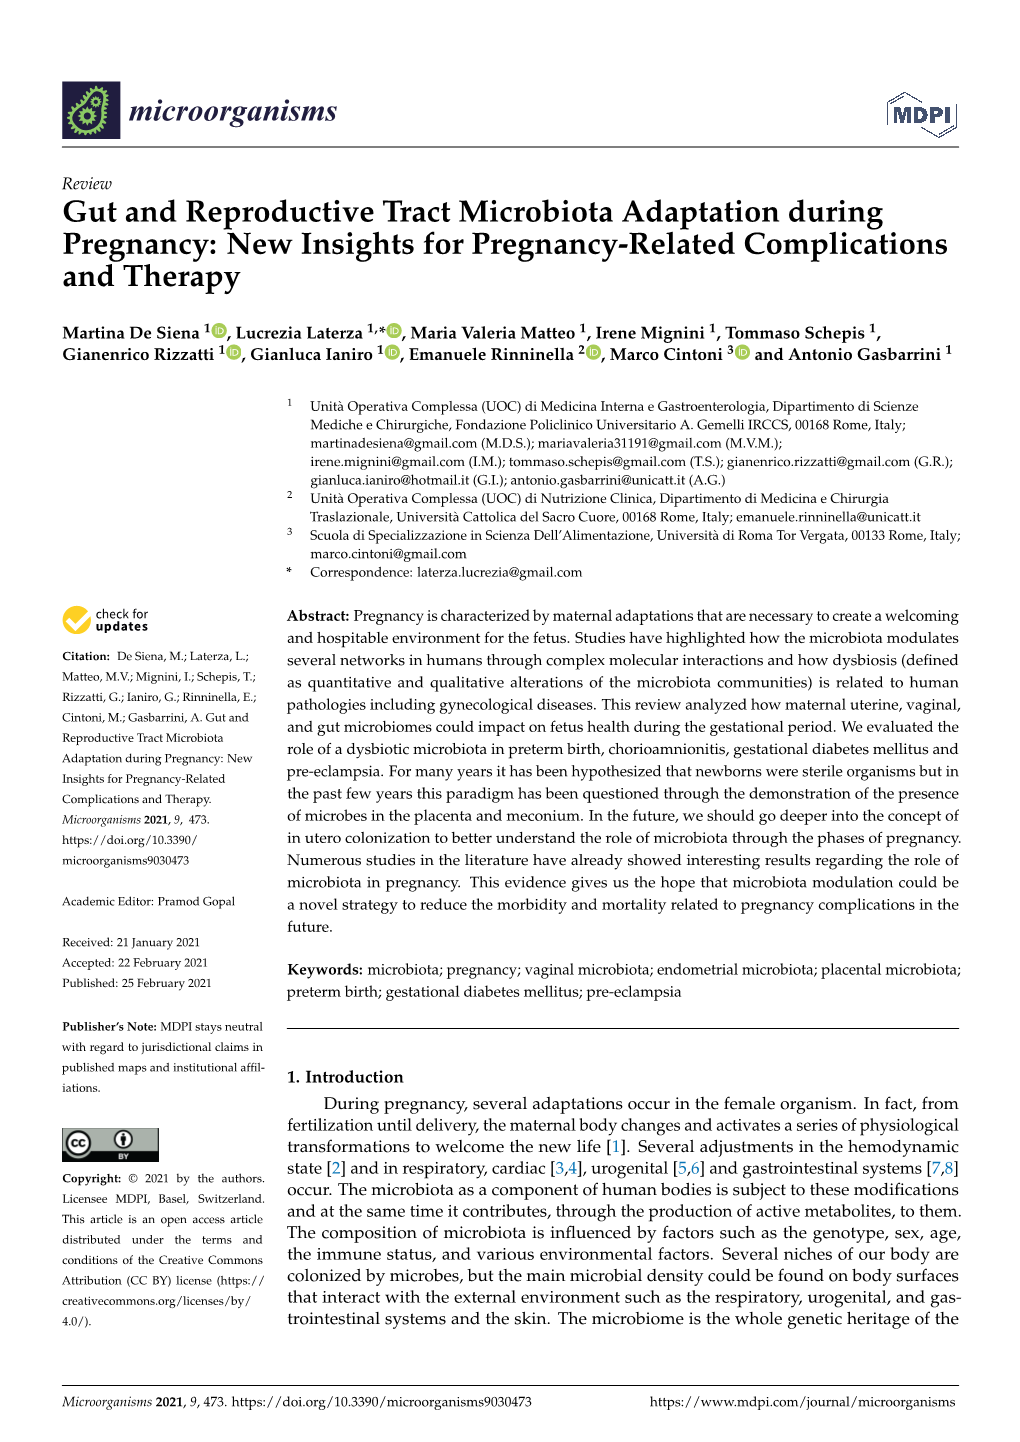 Gut and Reproductive Tract Microbiota Adaptation During Pregnancy: New Insights for Pregnancy-Related Complications and Therapy